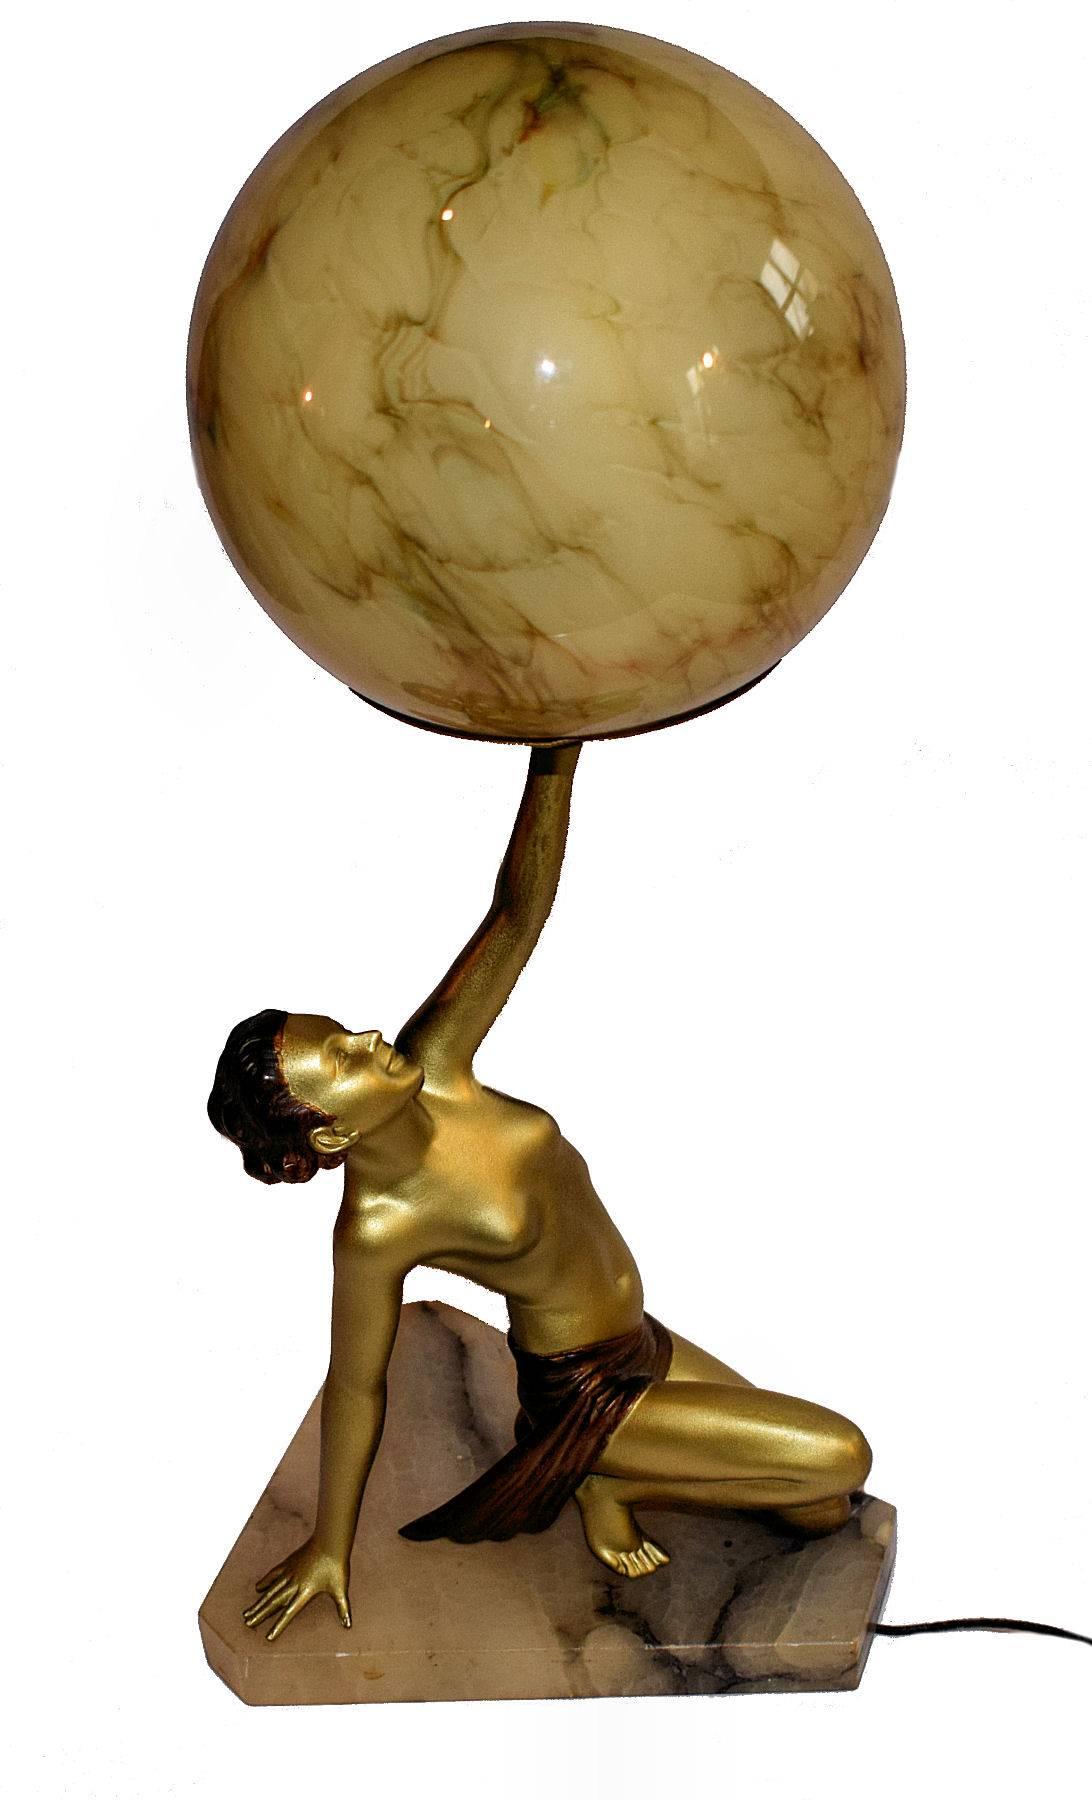 A really nice original Art Deco lady lamp, circa 1930.
Standing on an alabaster base she stands 12 inches without the shade and 16 inches with it. Made from spelter and cold painted she has minimal wear. The original amber marbled effect globe is